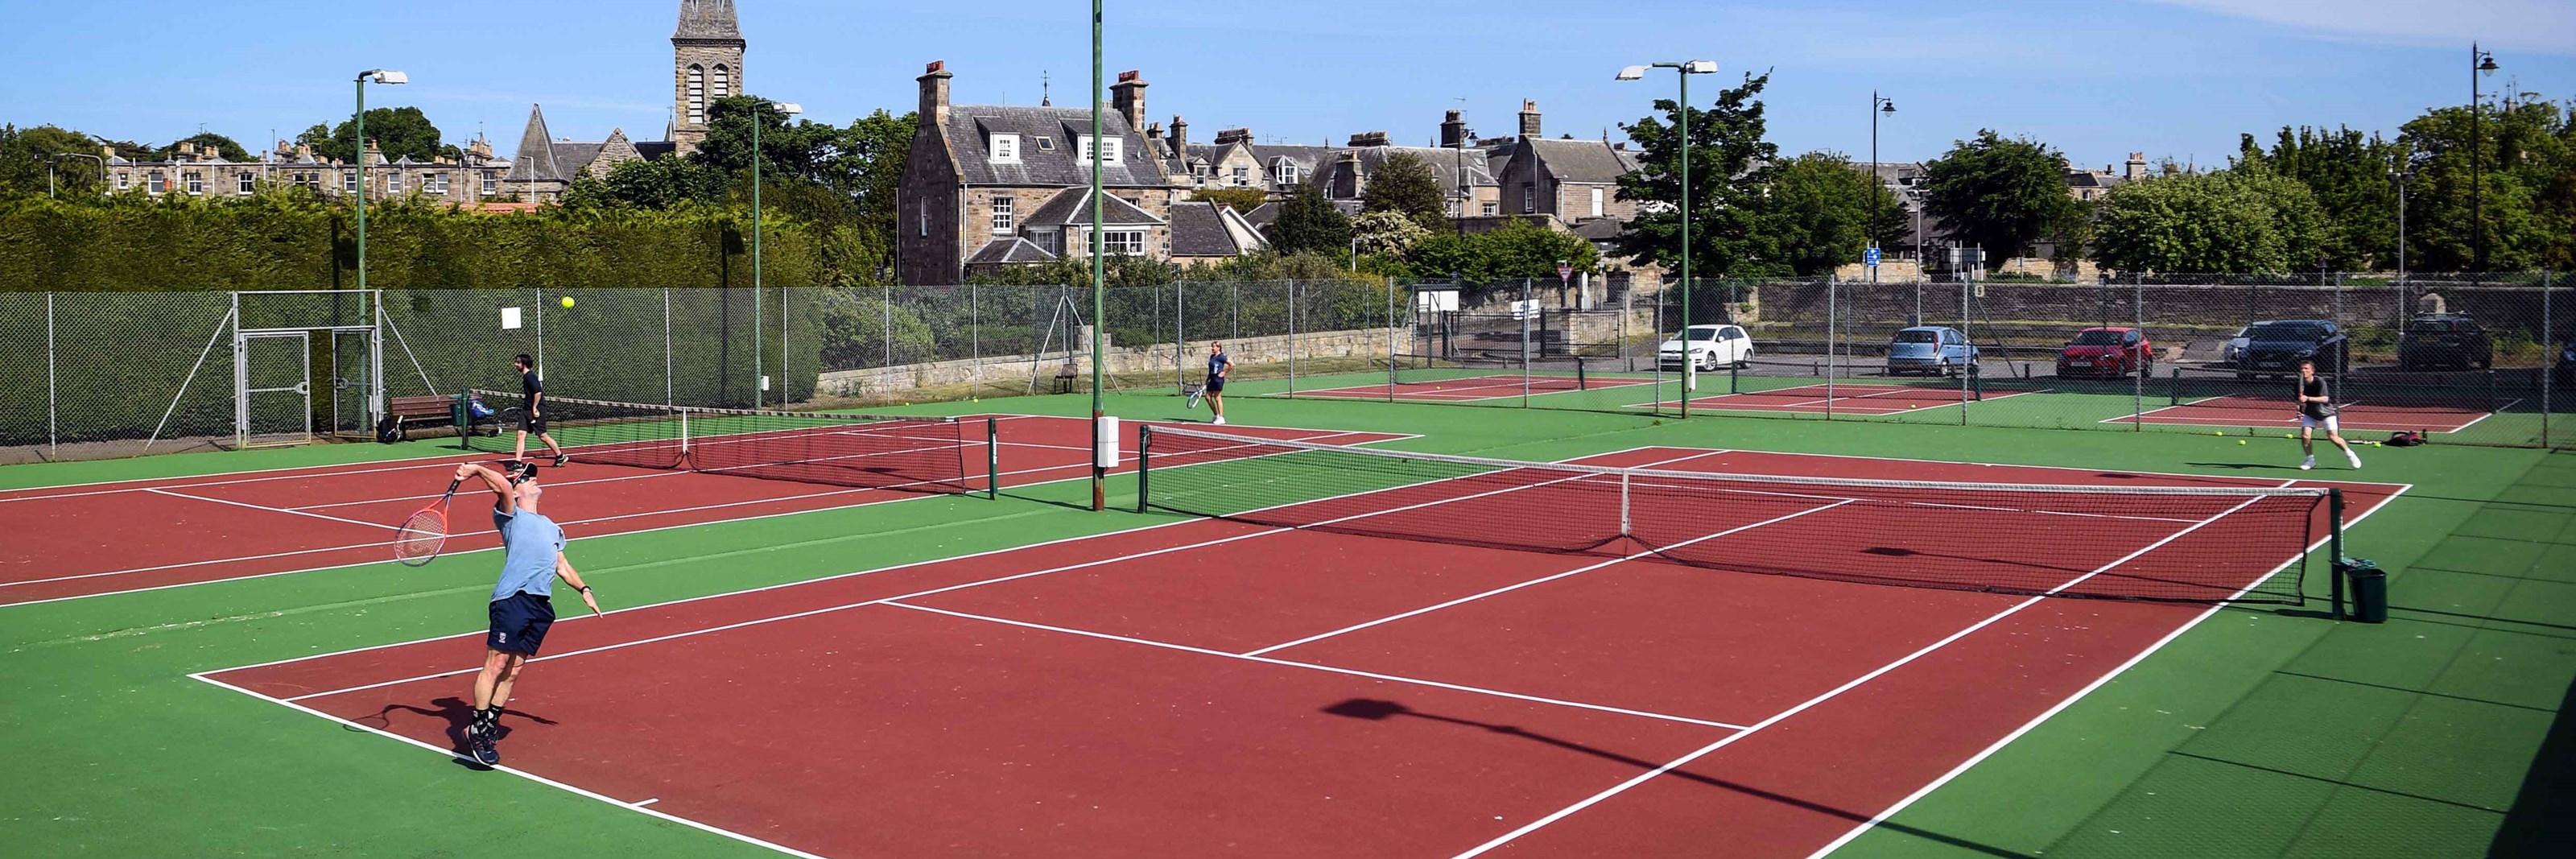 Match taking place on local club courts